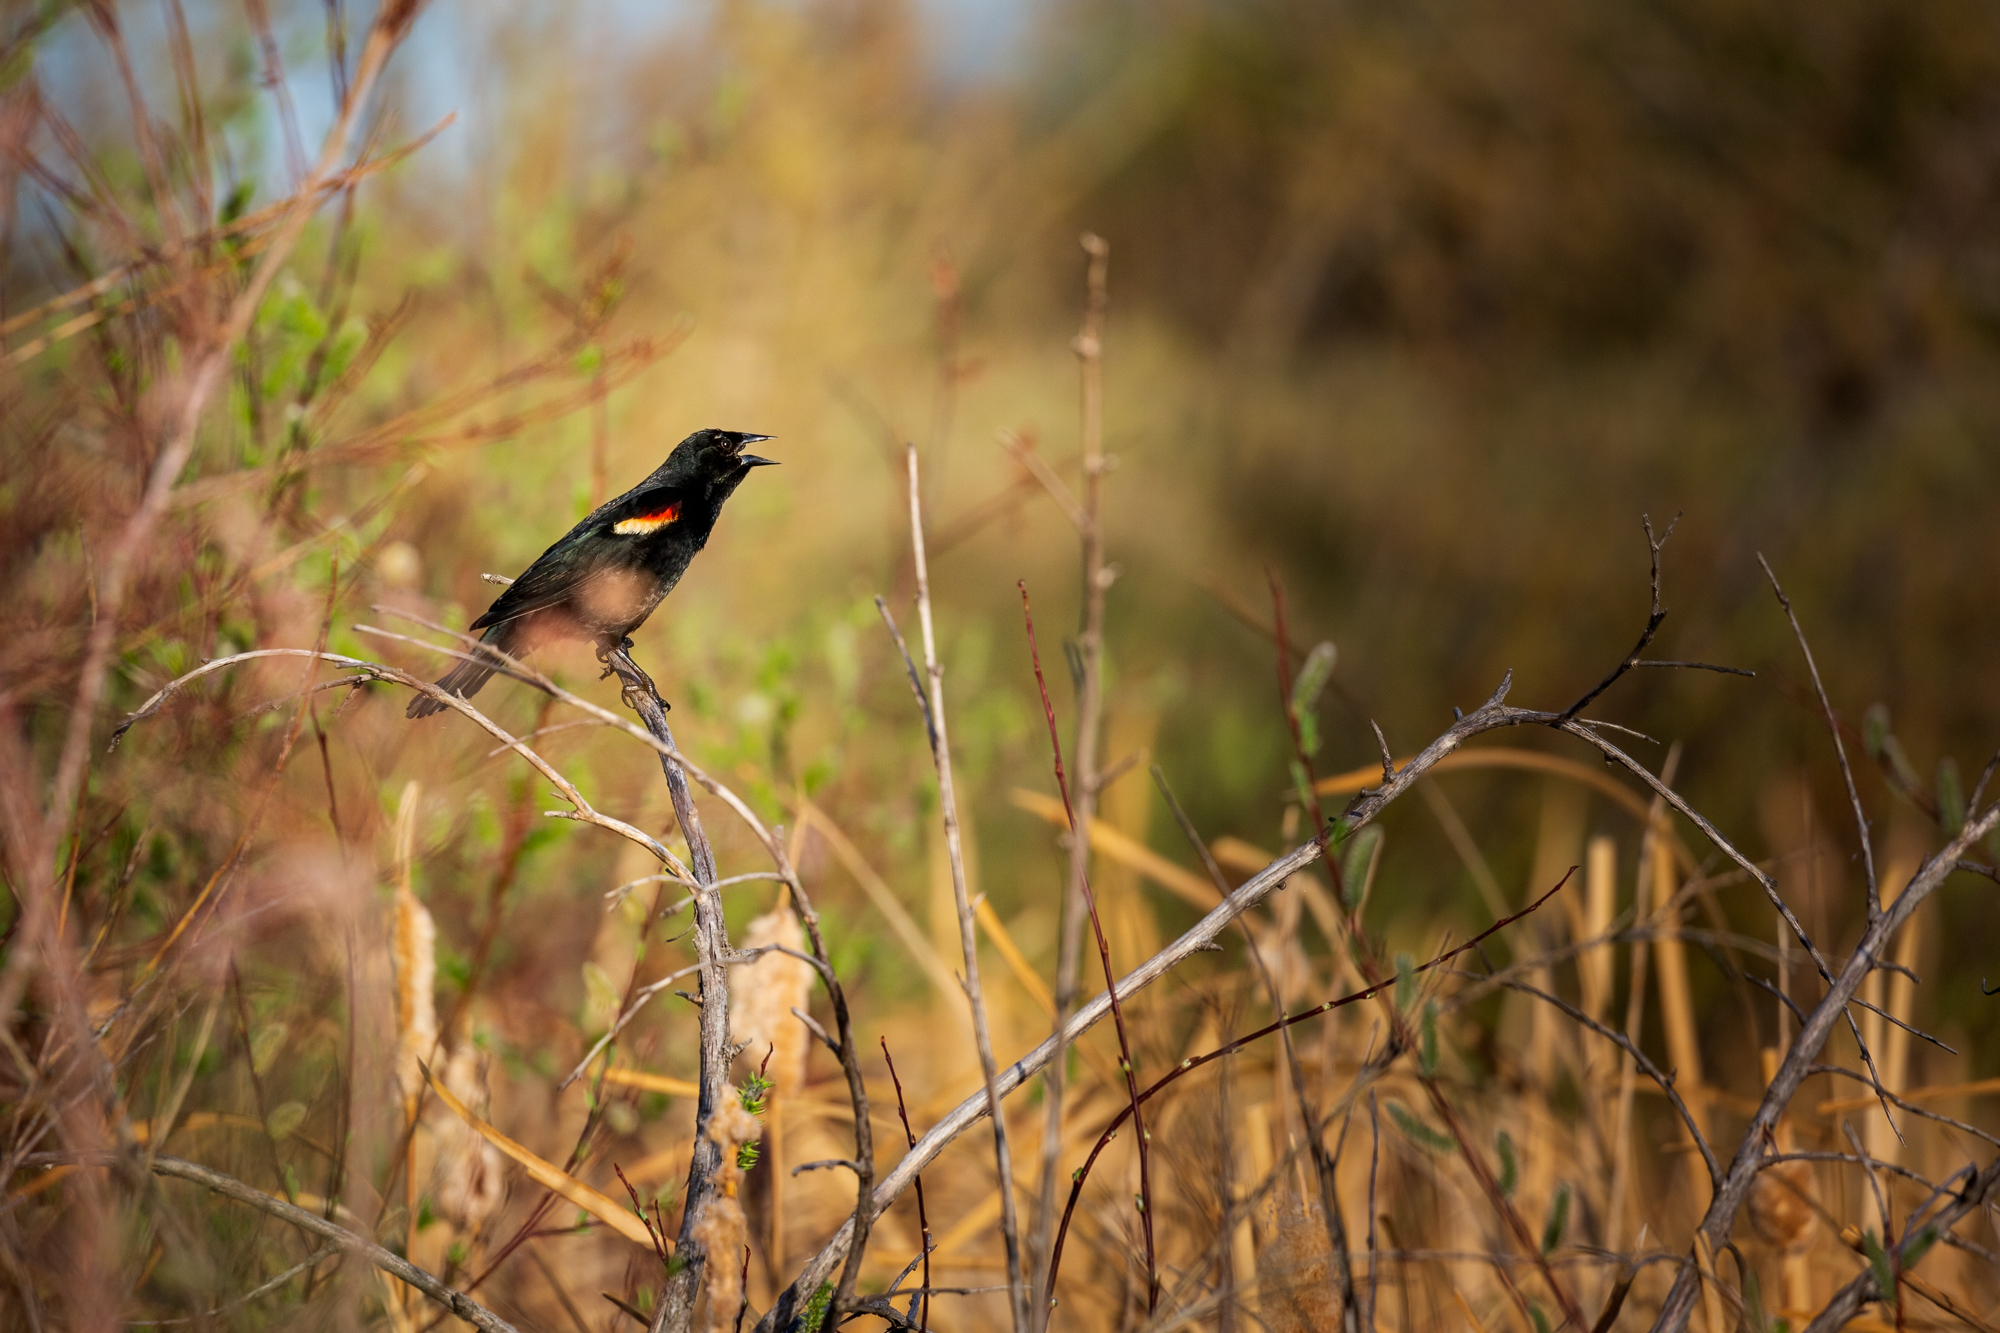 Red-Winged Blackbird sitting on a branch